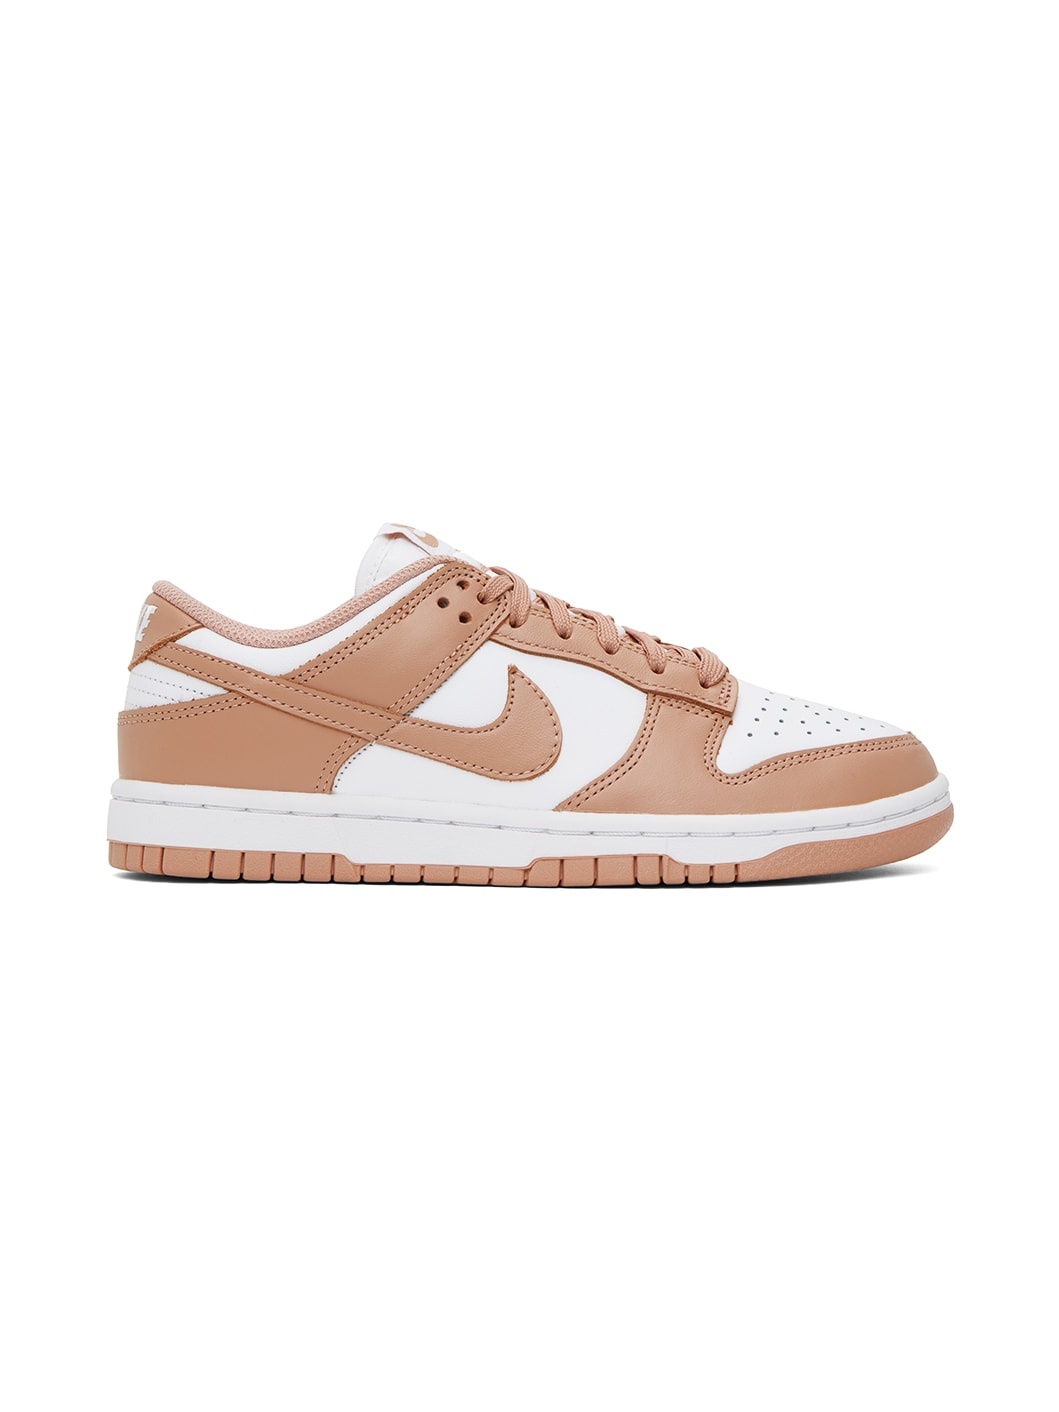 White & Beige Dunk Low By You Sneakers - 1